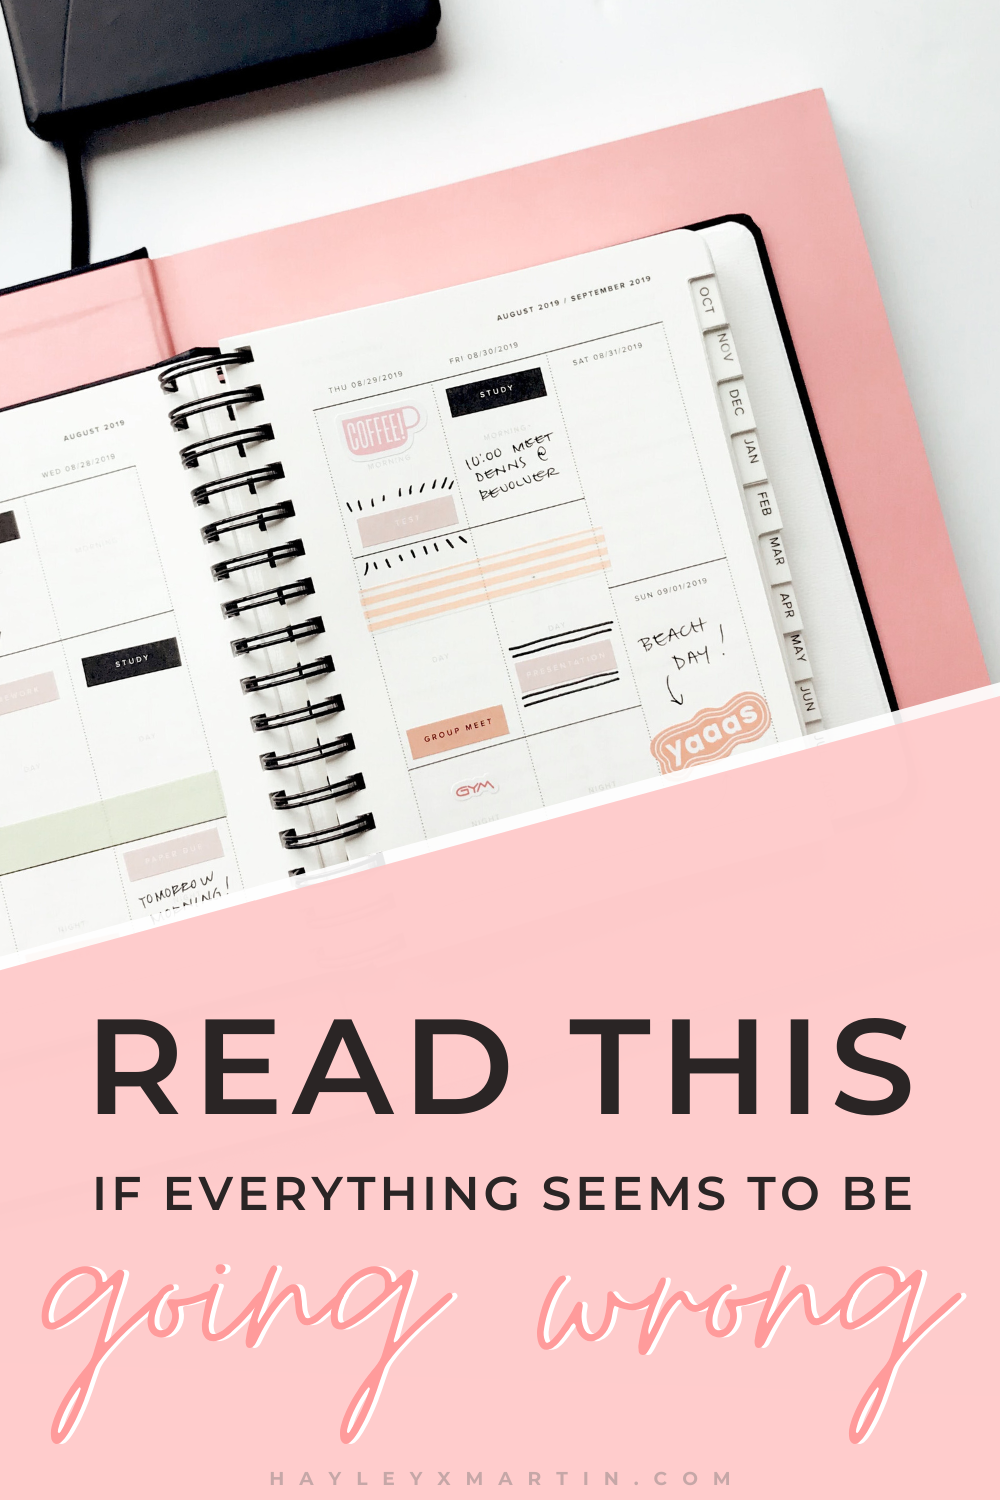 READ THIS IF EVERYTHING SEEMS TO BE GOING WRONG | HOW TO GET YOUR LIFE TOGETHER | HAYLEYXMARTIN